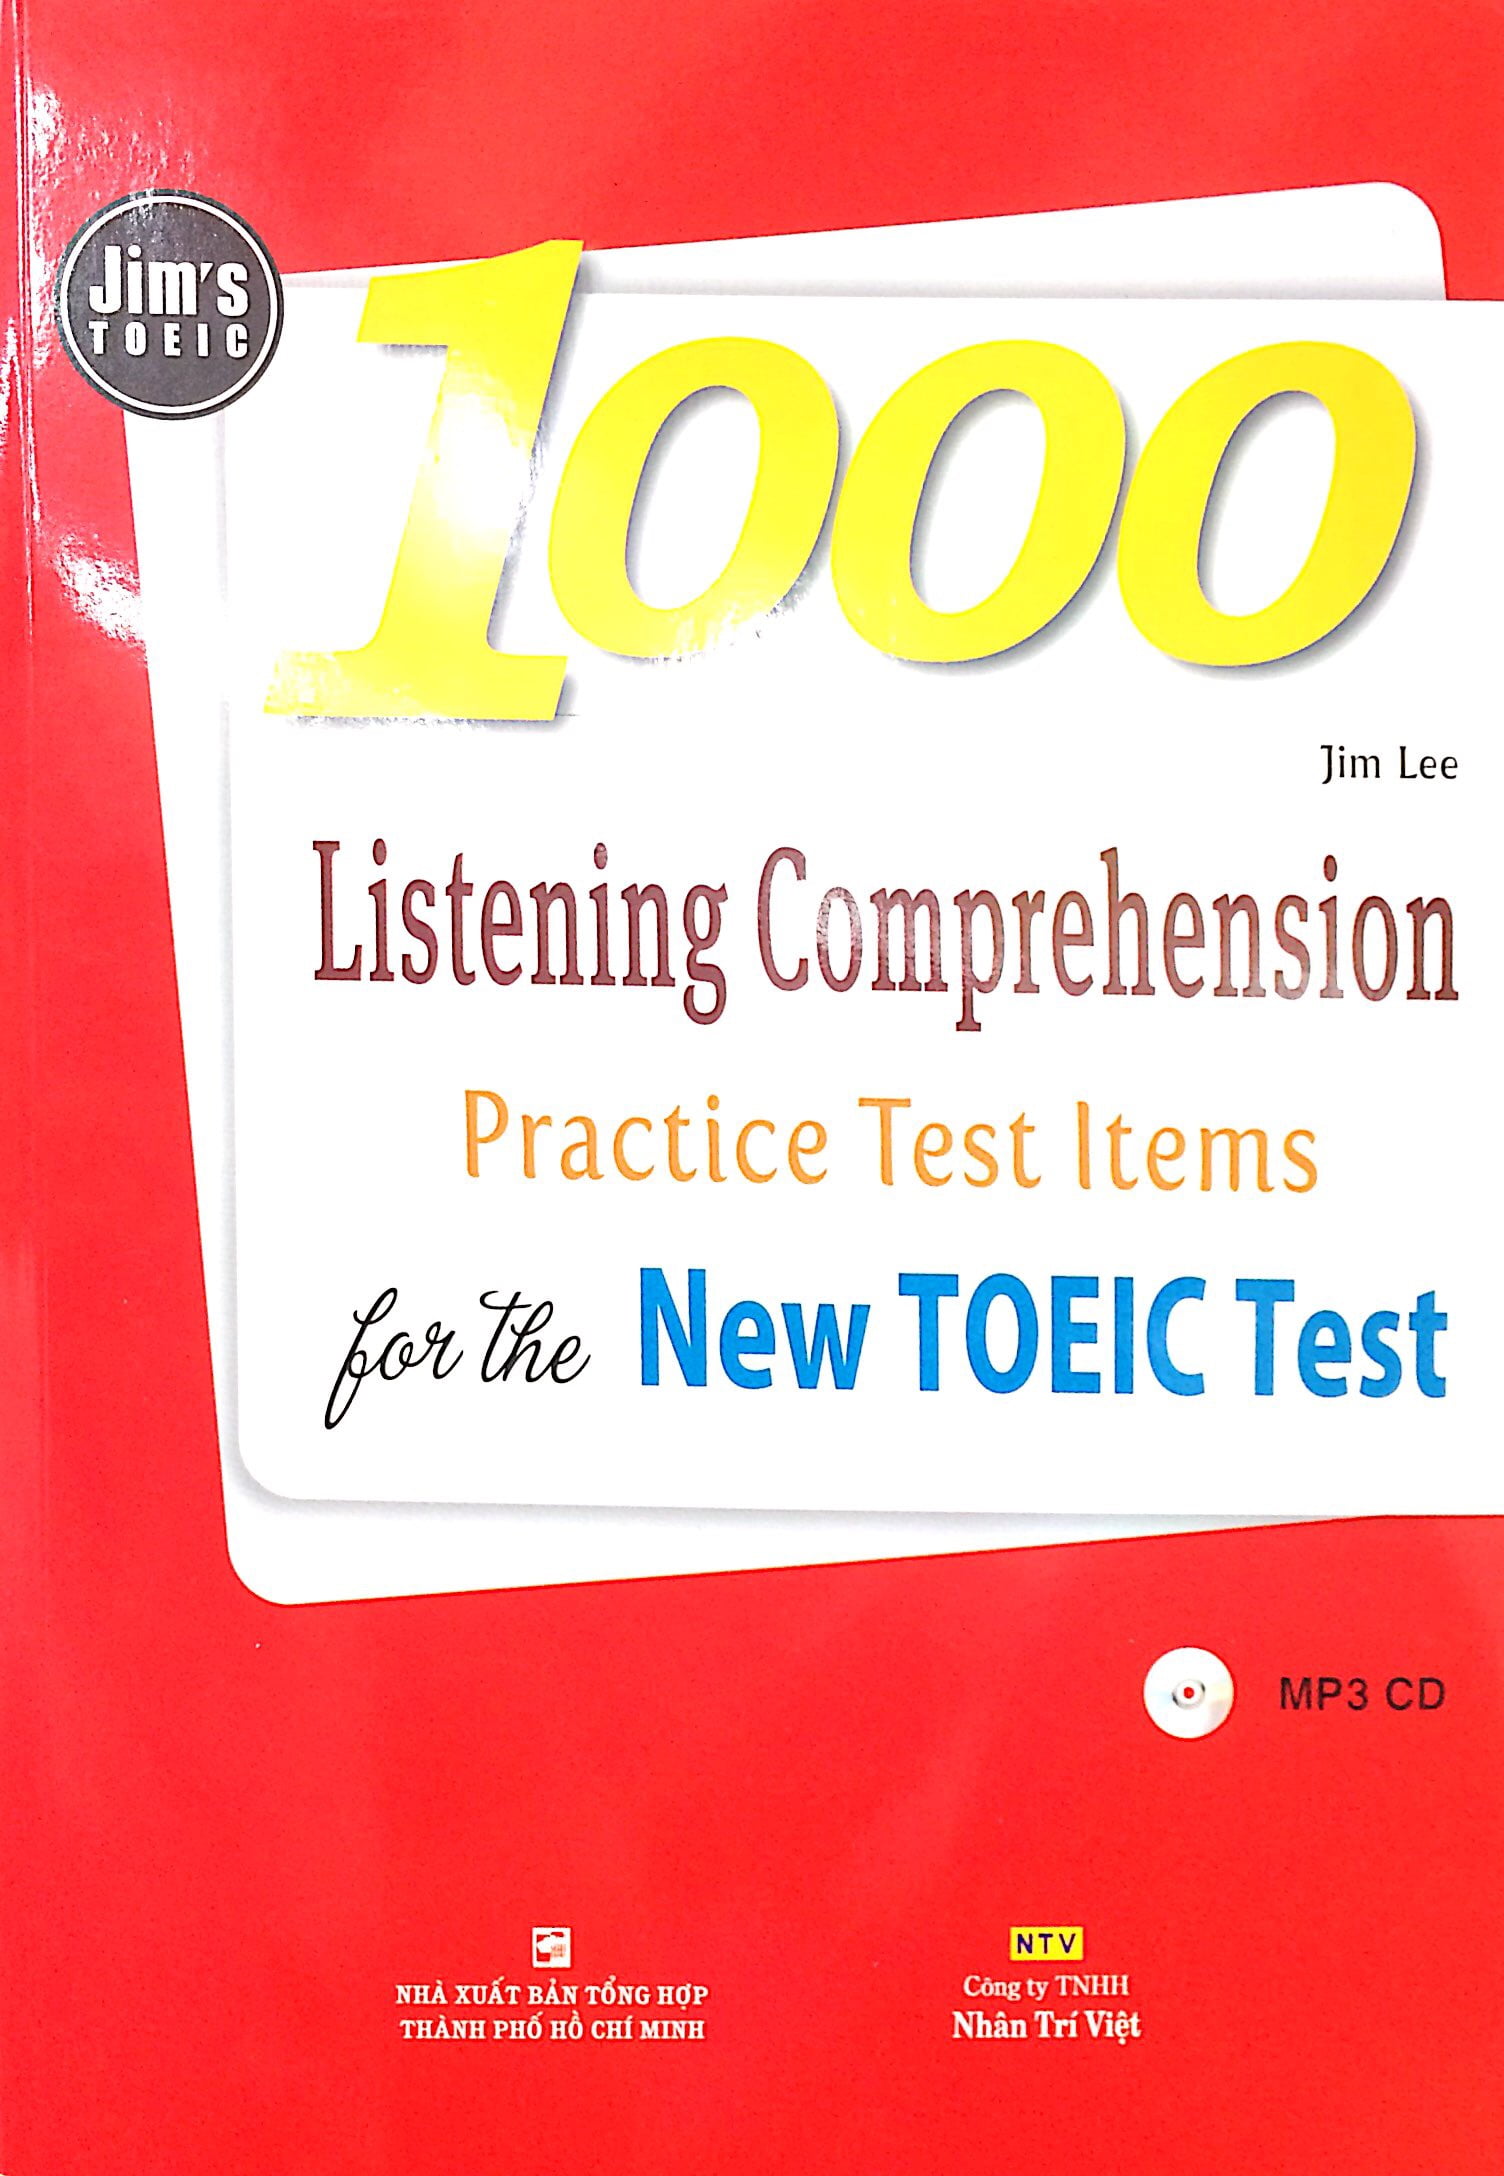 1000 Listening Comprehension Practice Test Items For The New TOEIC Test PDF